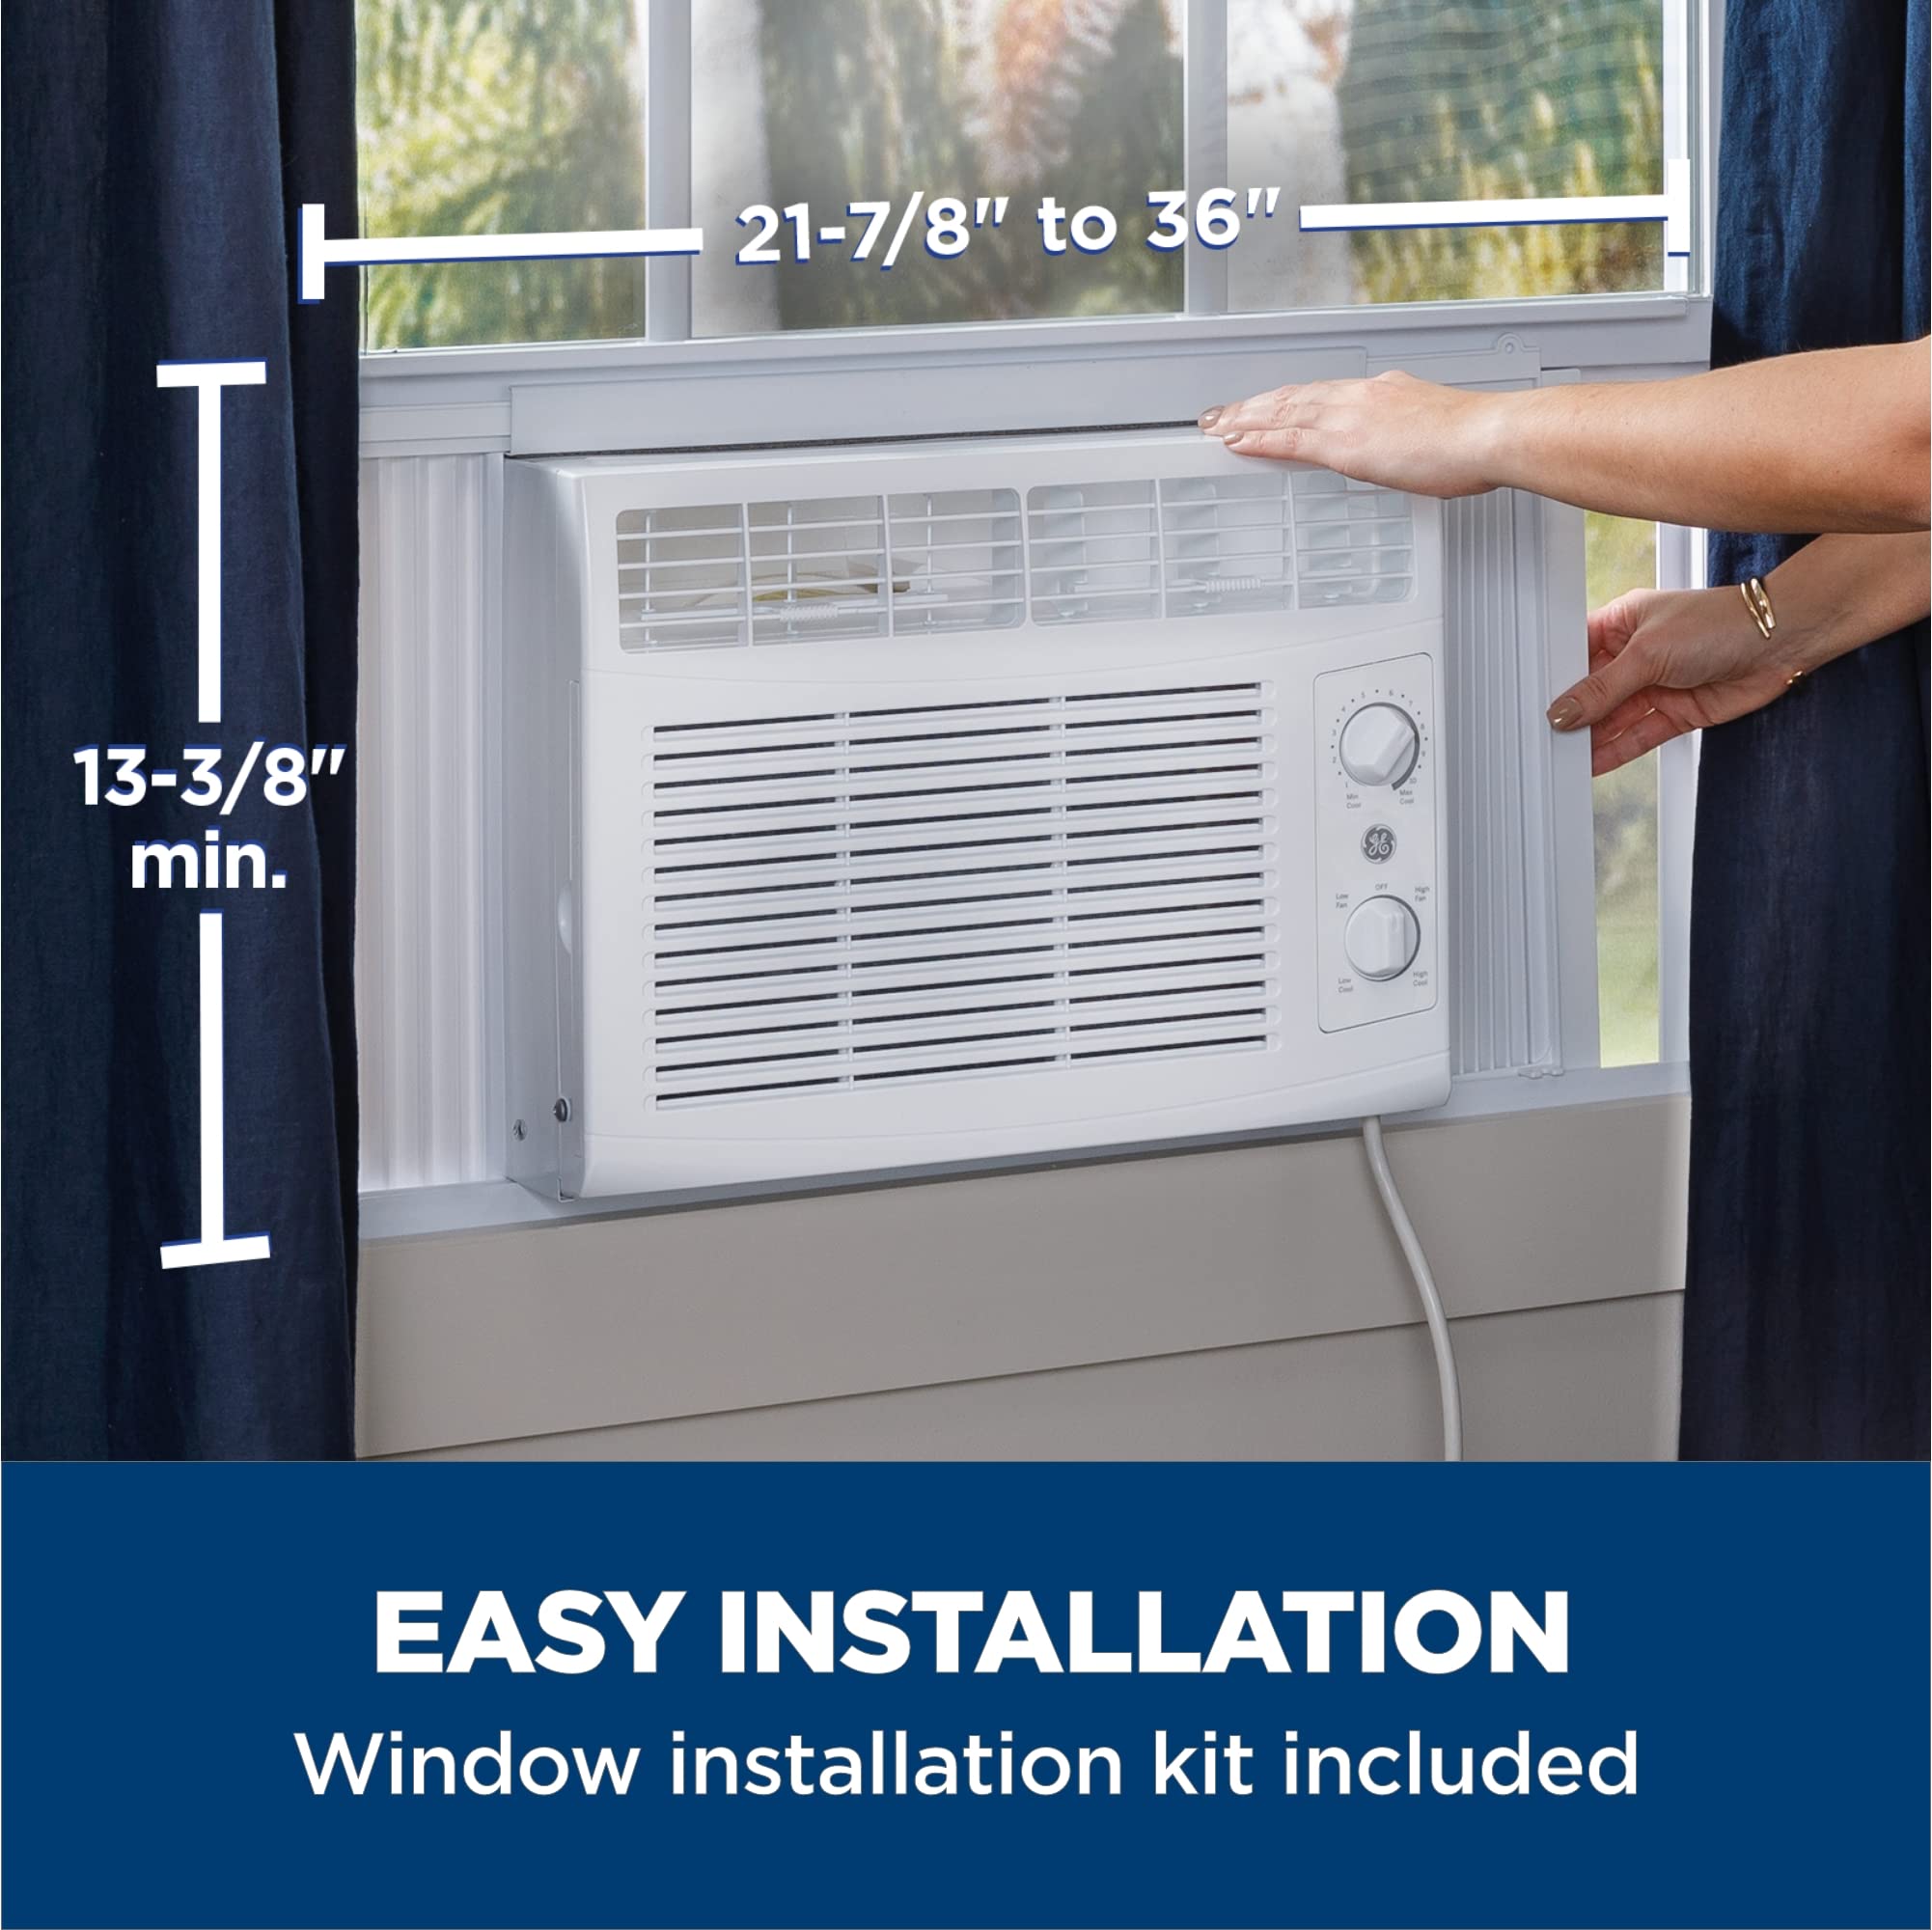 GE Window Air Conditioner 5000 BTU, Efficient Cooling For Smaller Areas Like Bedrooms And Guest Rooms, 5K BTU Window AC Unit With Easy Install Kit, White